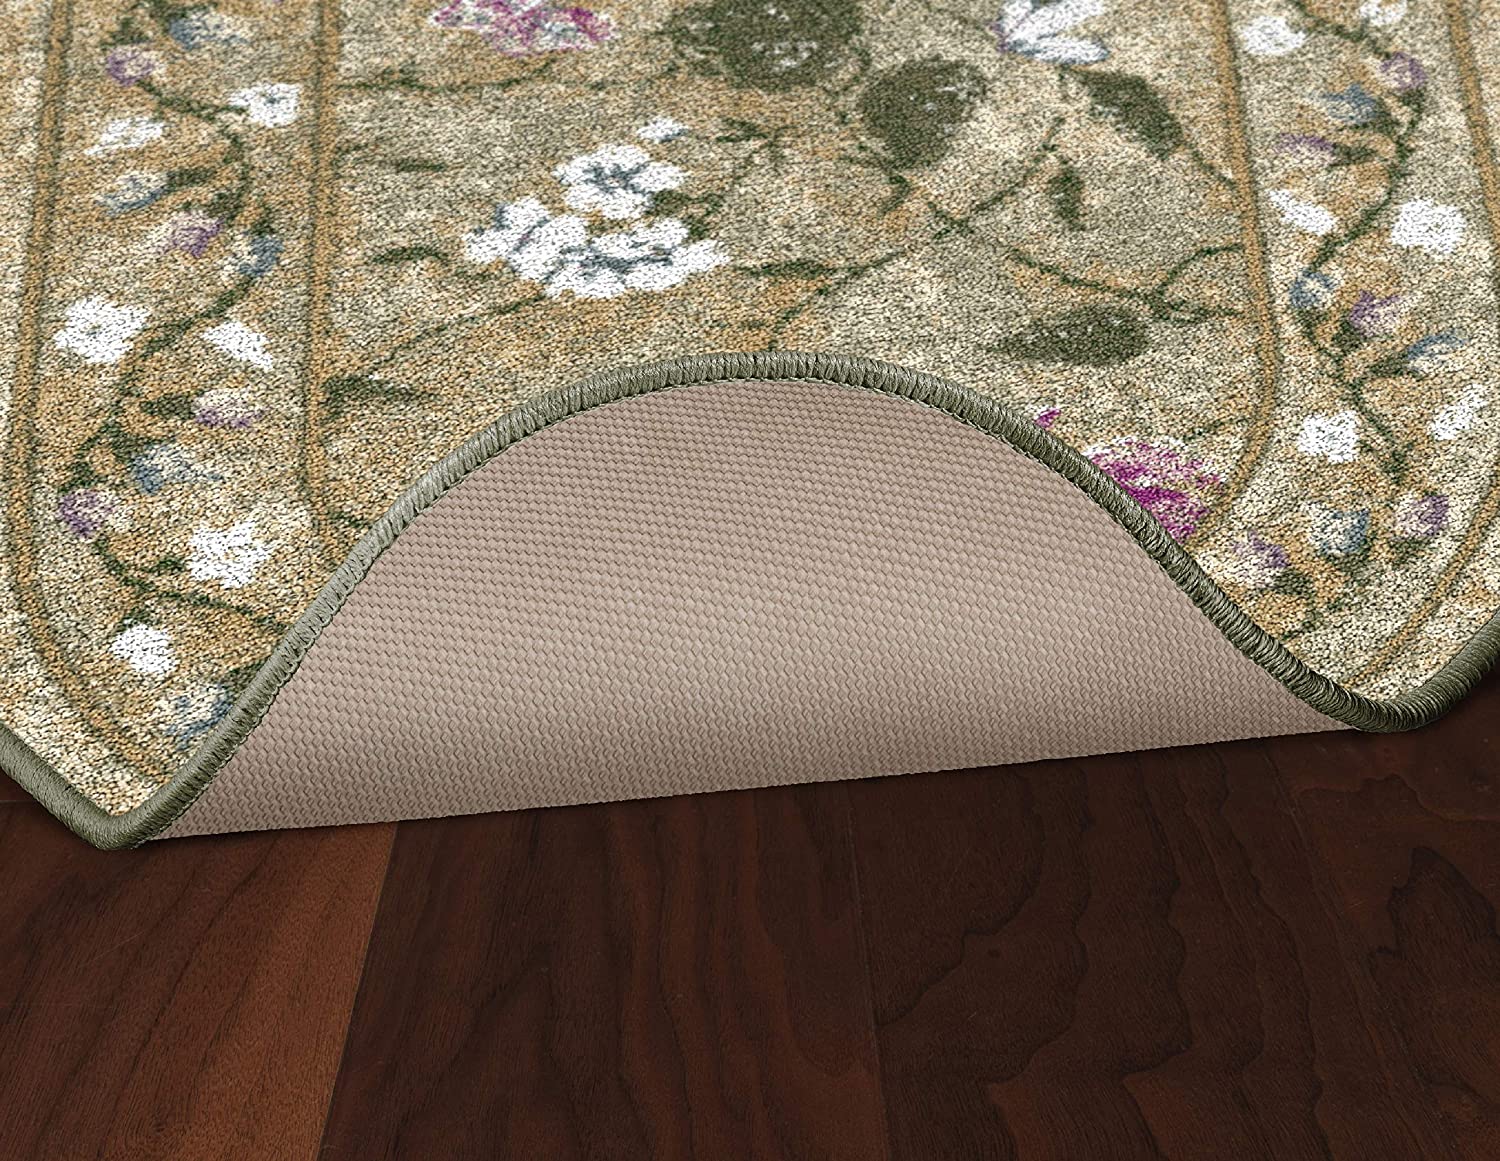 Brumlow Mills Butterfly Floral Oval Area Rug - Linen Universe Co.